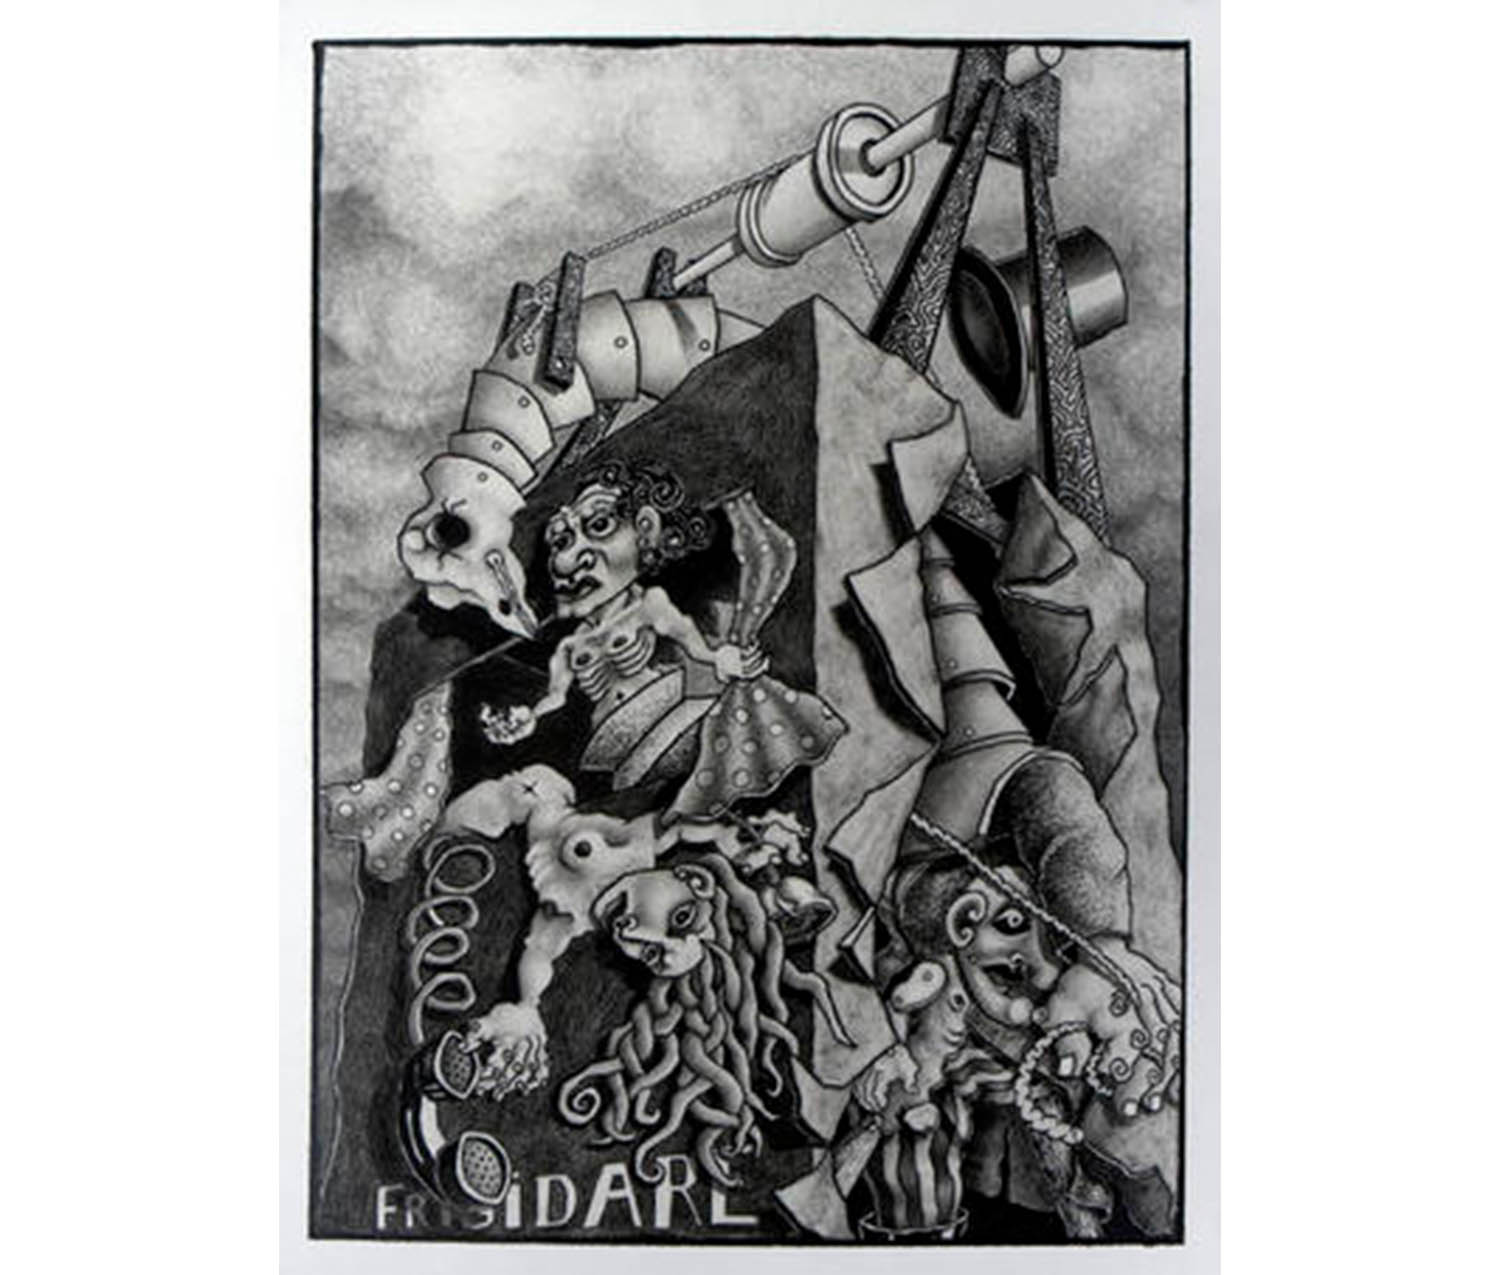 small muscular figures sticking out of a large steel machine; text along the bottom reads "FRIGIDARE"